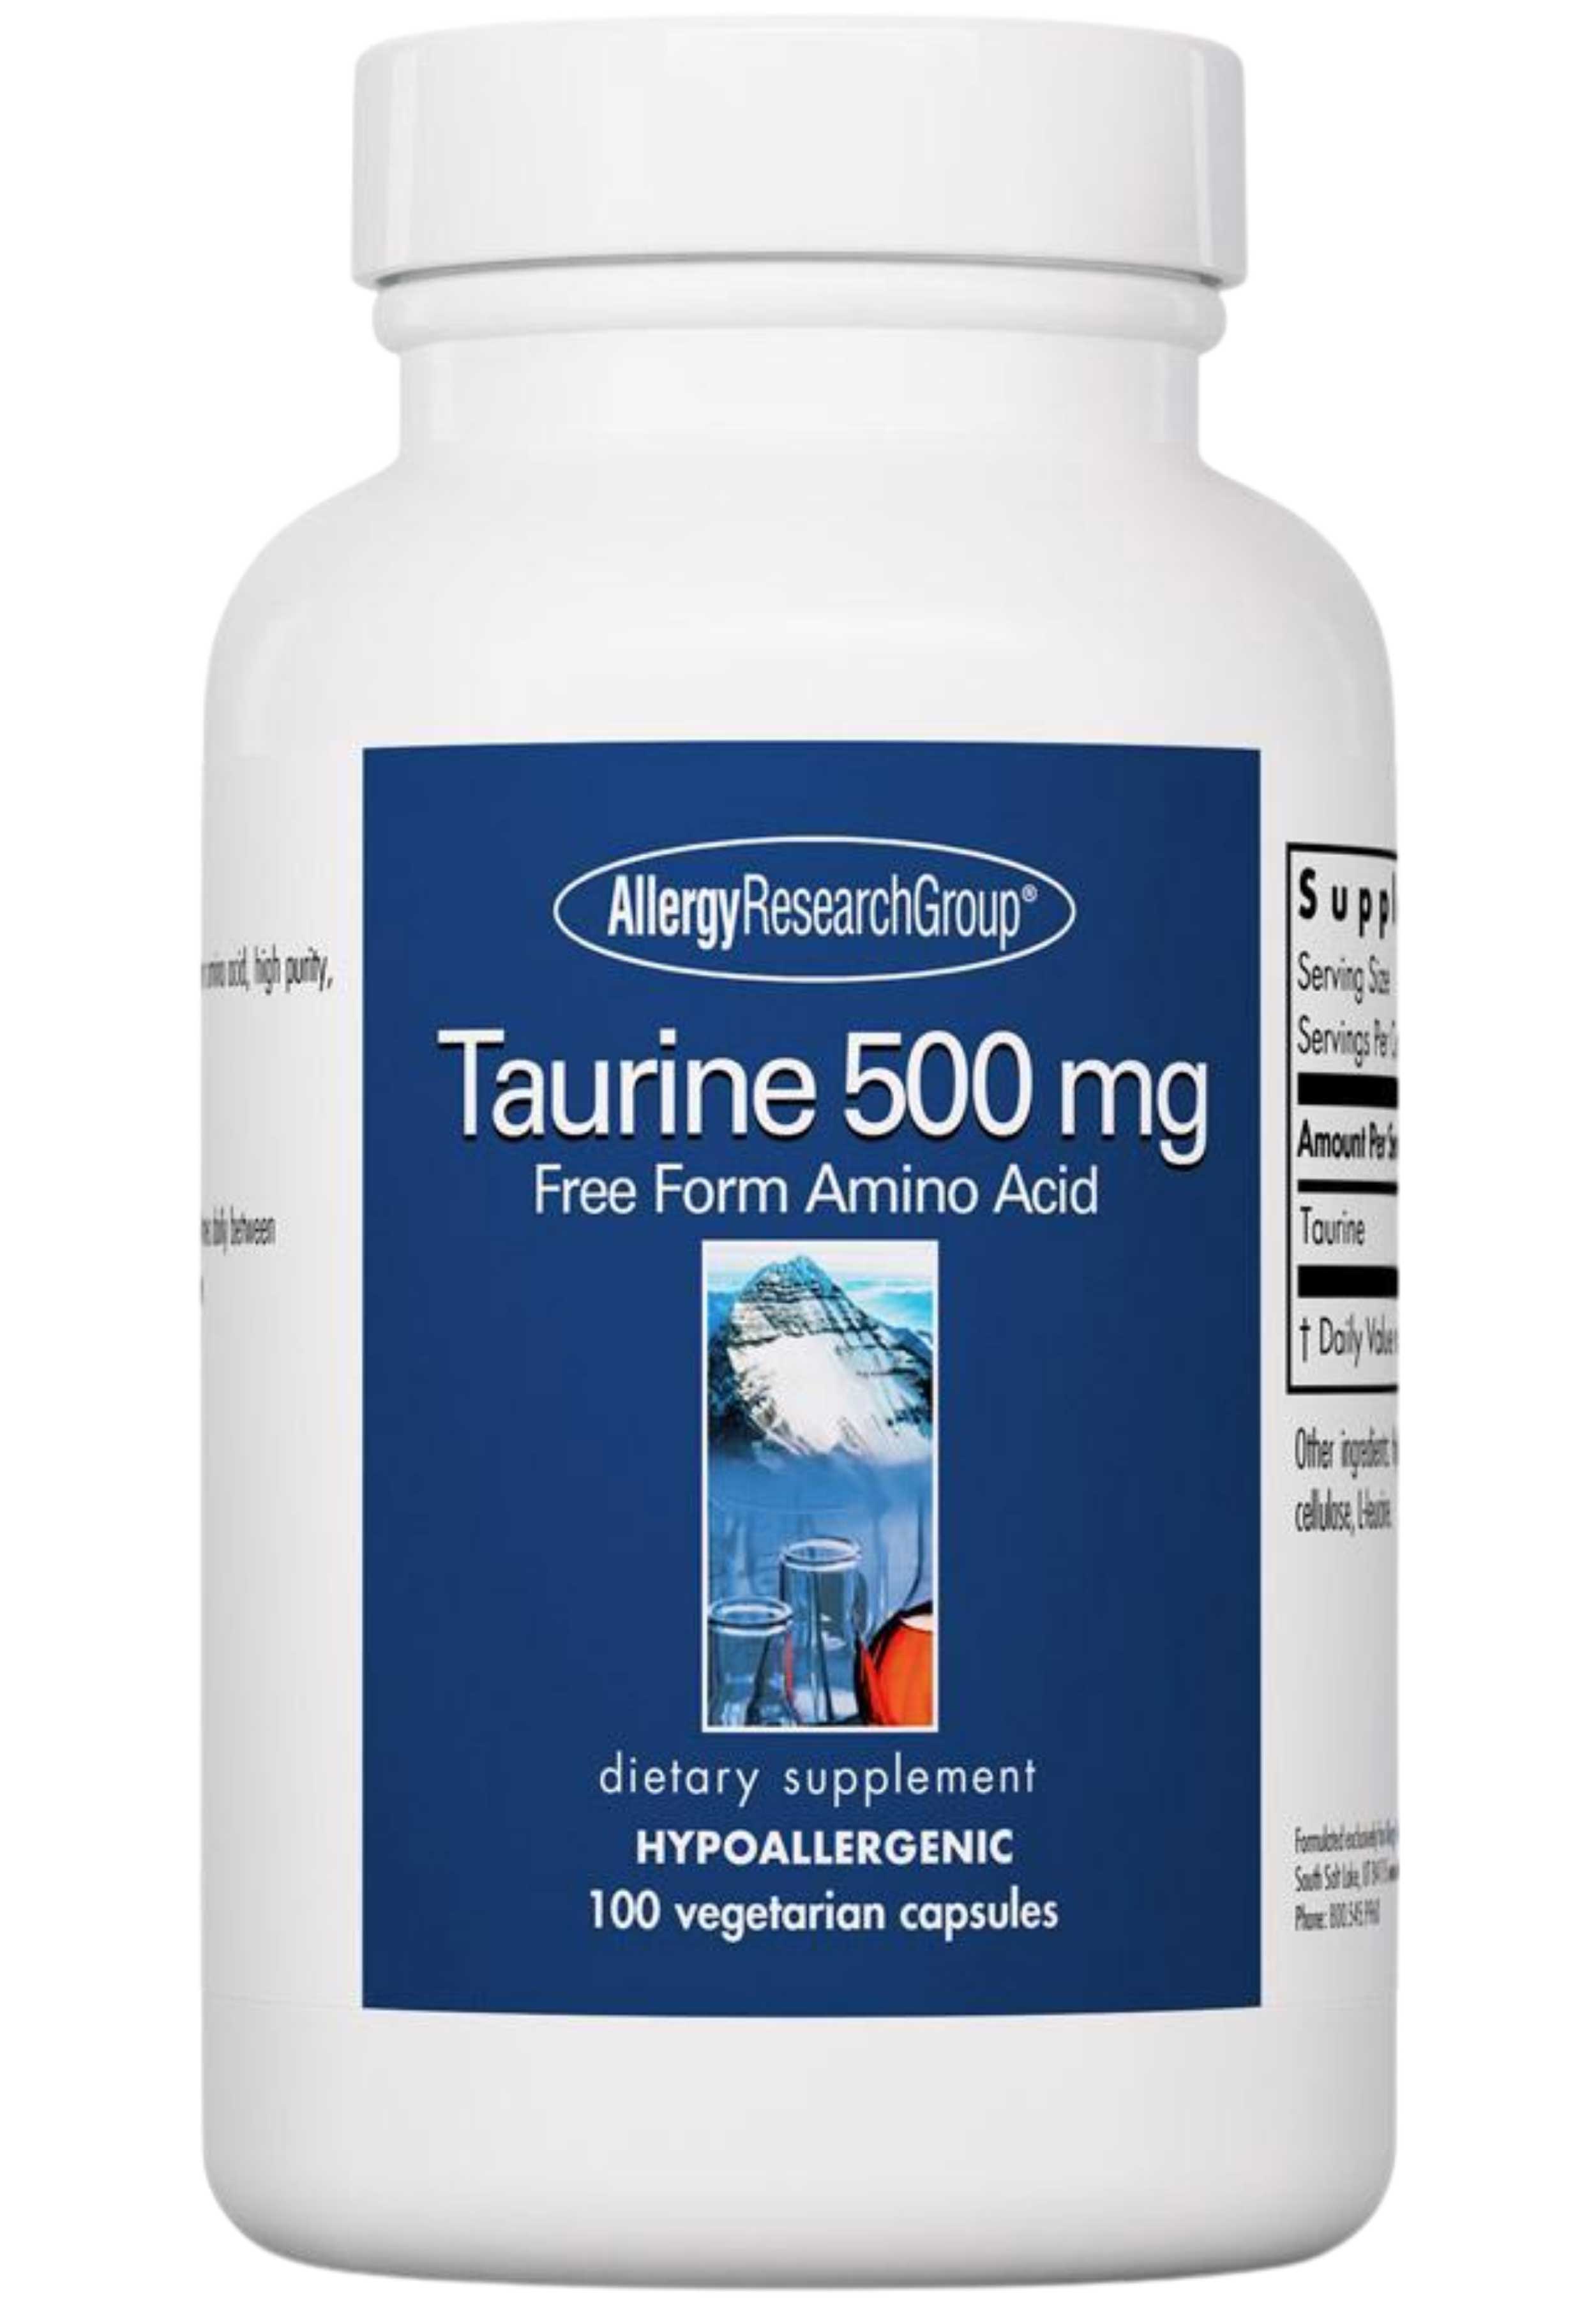 Allergy Research Group Taurine 500 mg